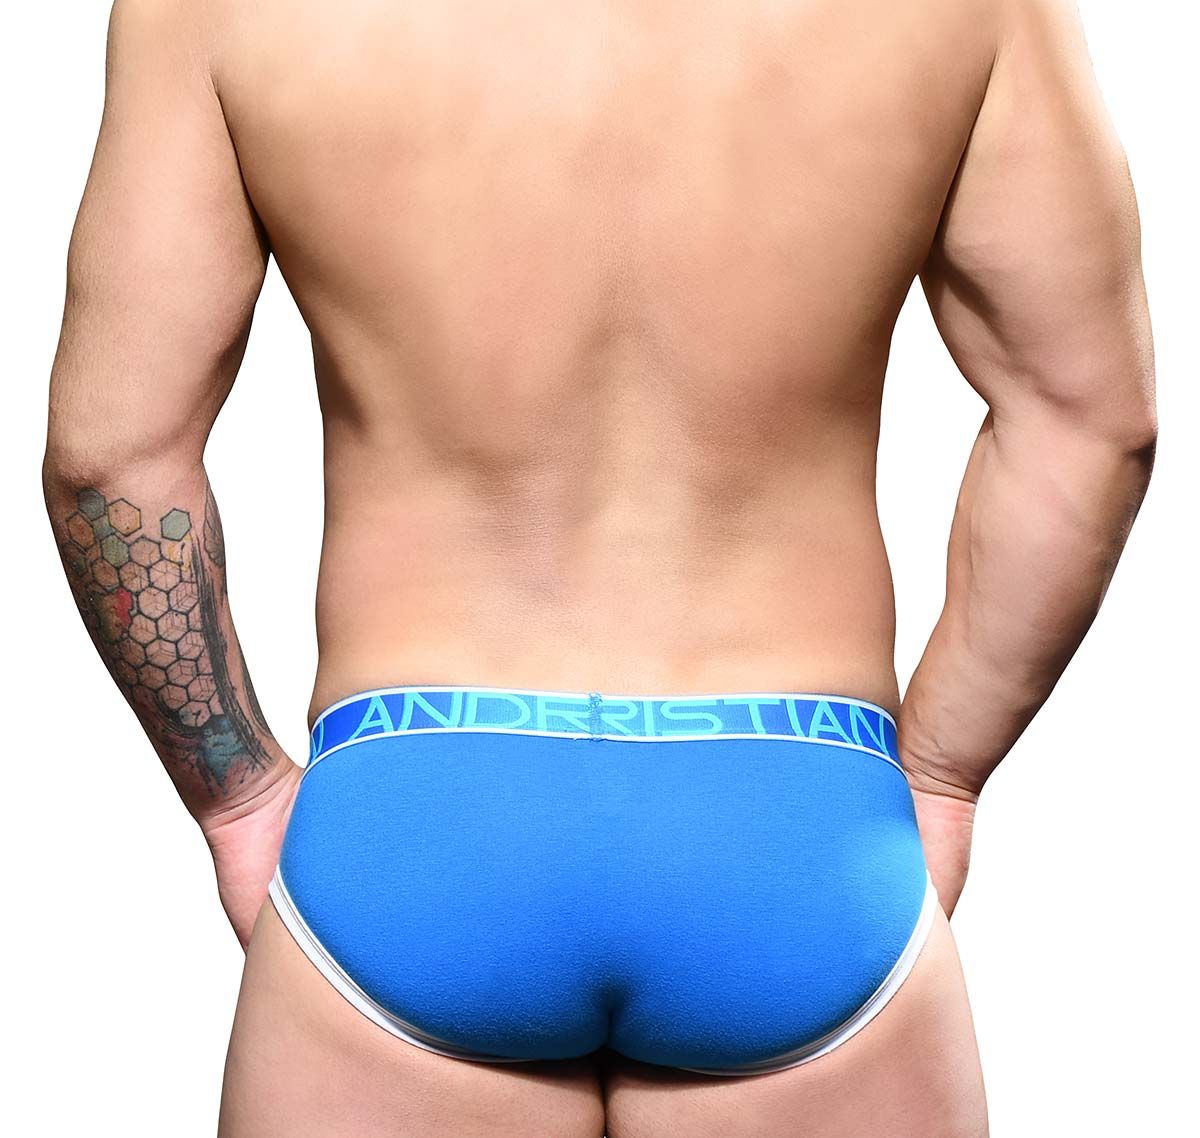 Andrew Christian Slip FLY TAGLESS BRIEF w/ ALMOST NAKED 92187, bleu